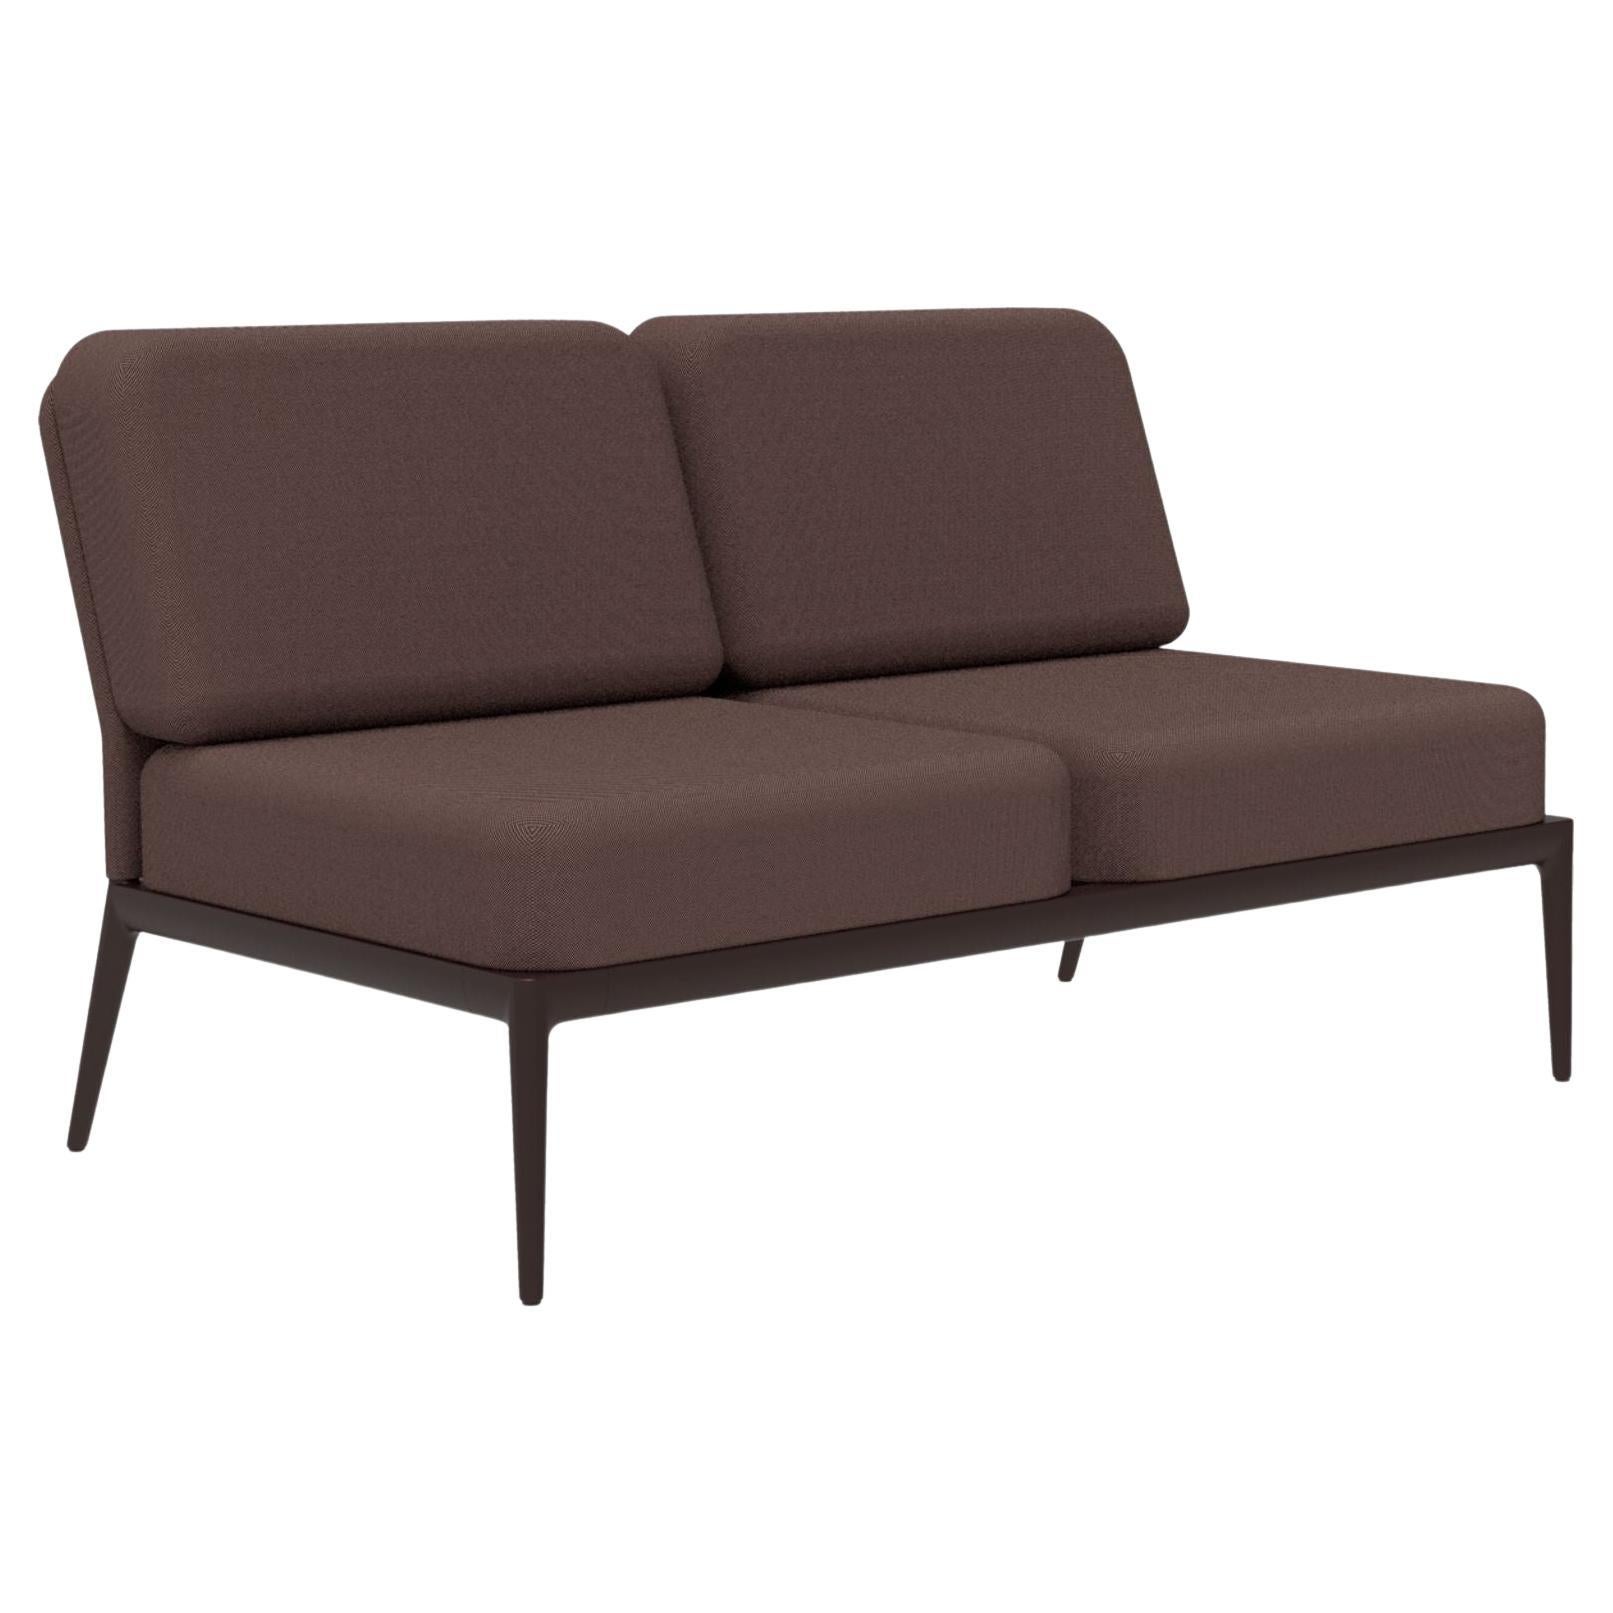 Cover Chocolate Double Central Modular Sofa by Mowee For Sale